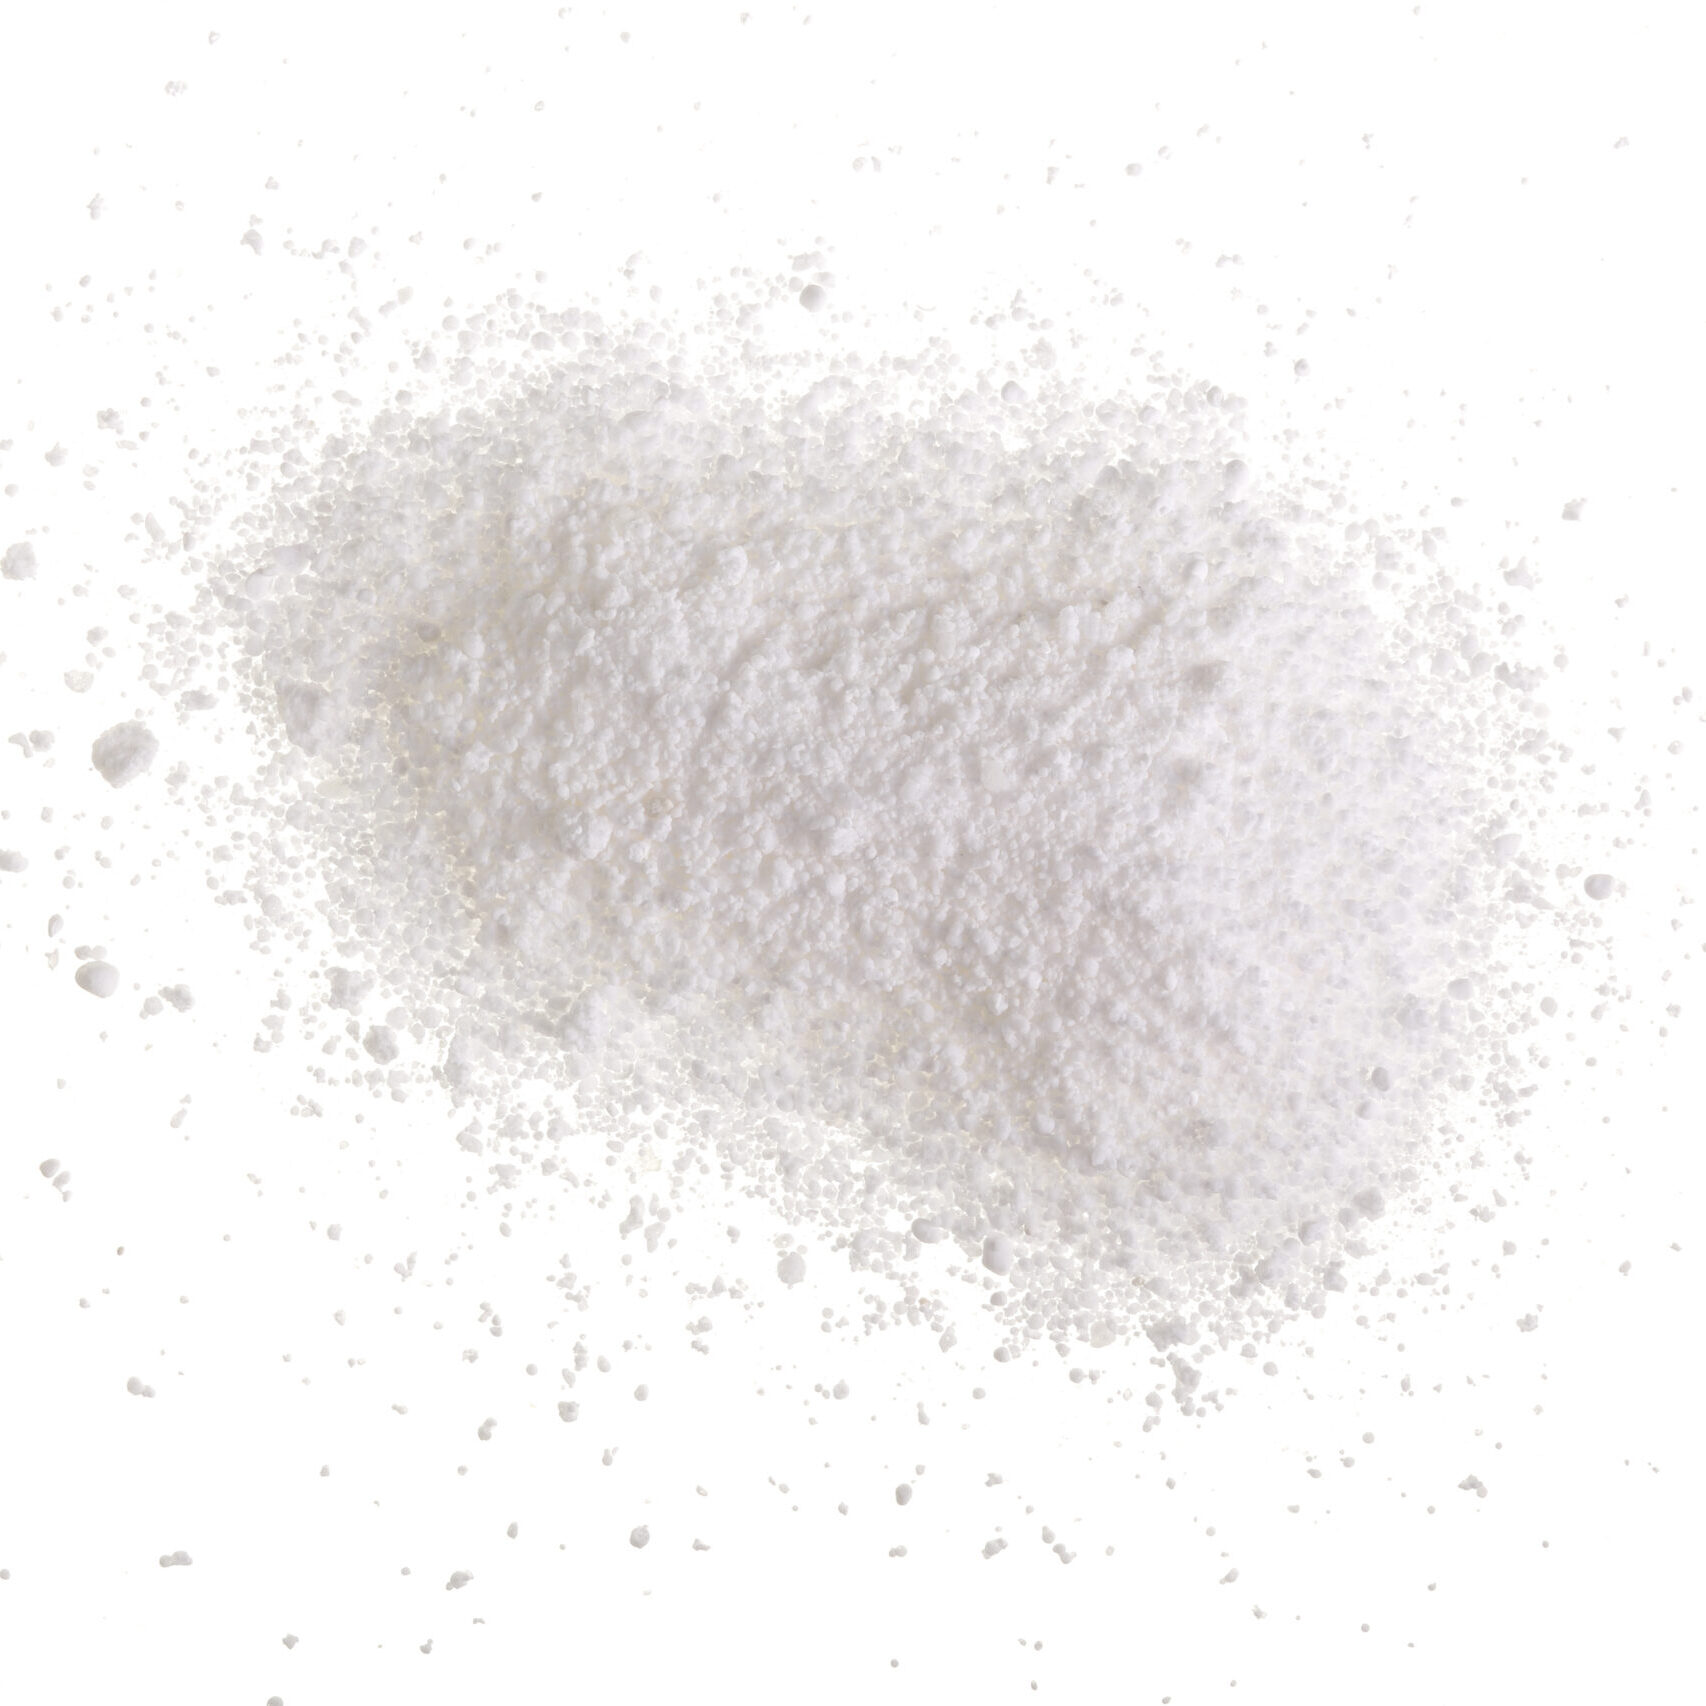 Washing powder isolated on white background. Top view. Flat lay.